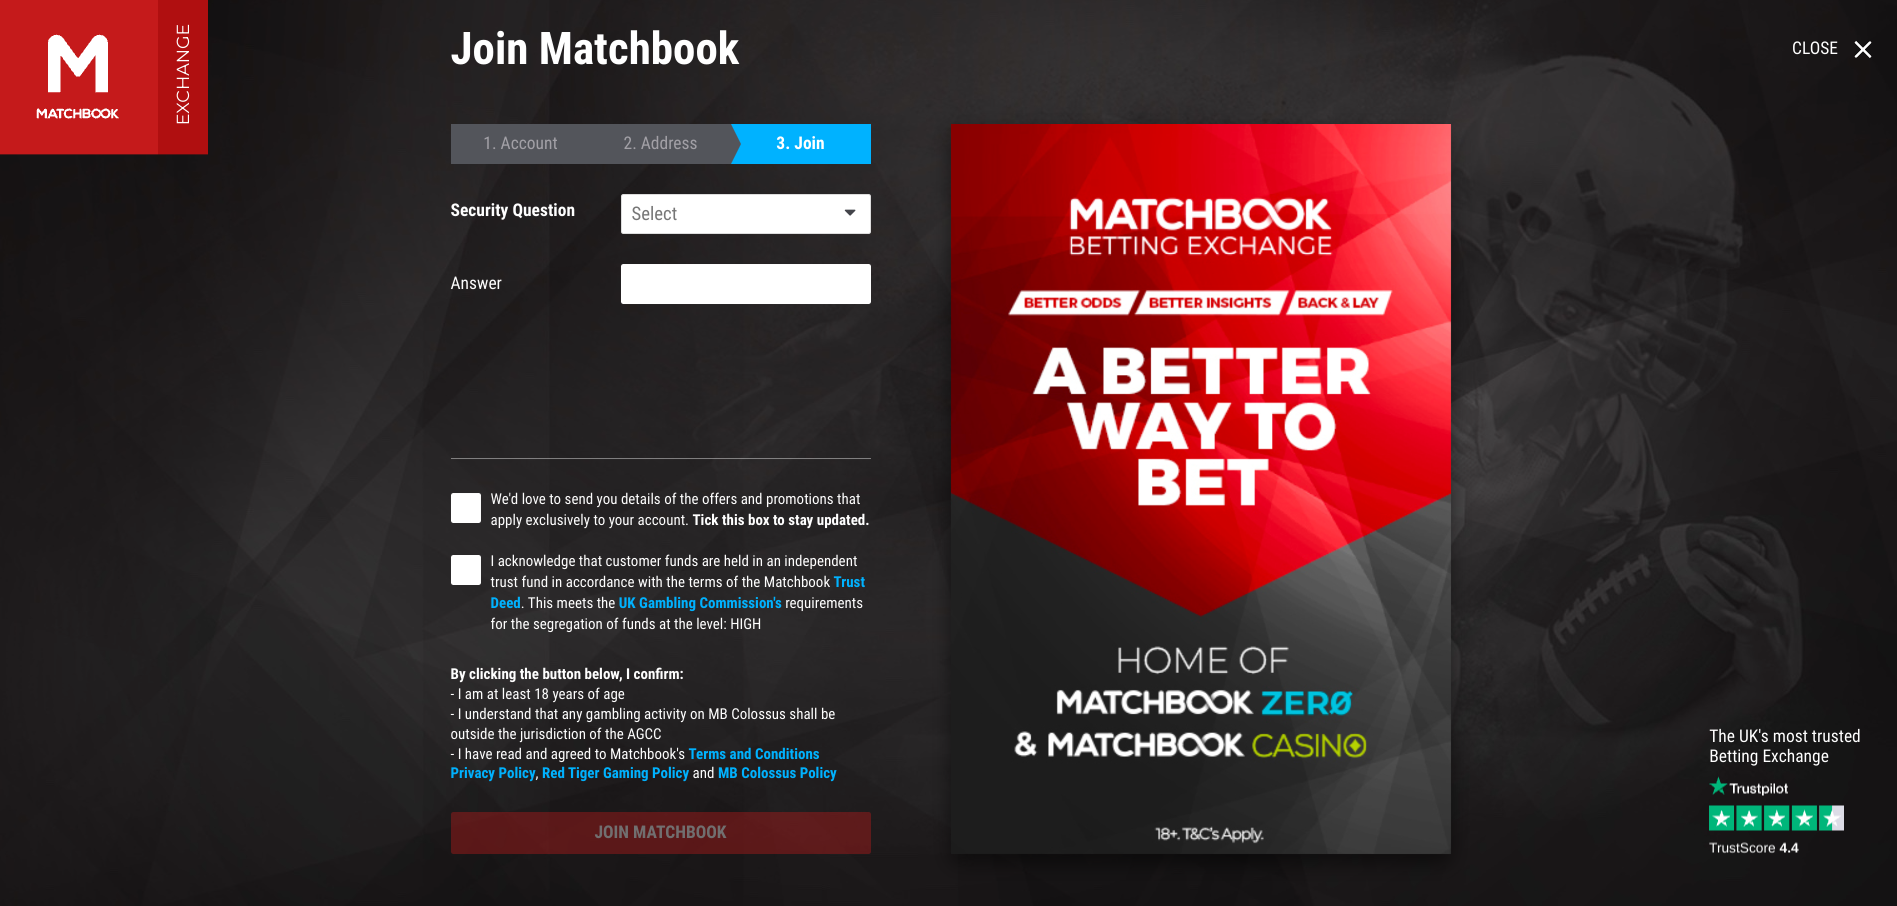 How to complete the account registration process at Matchbook